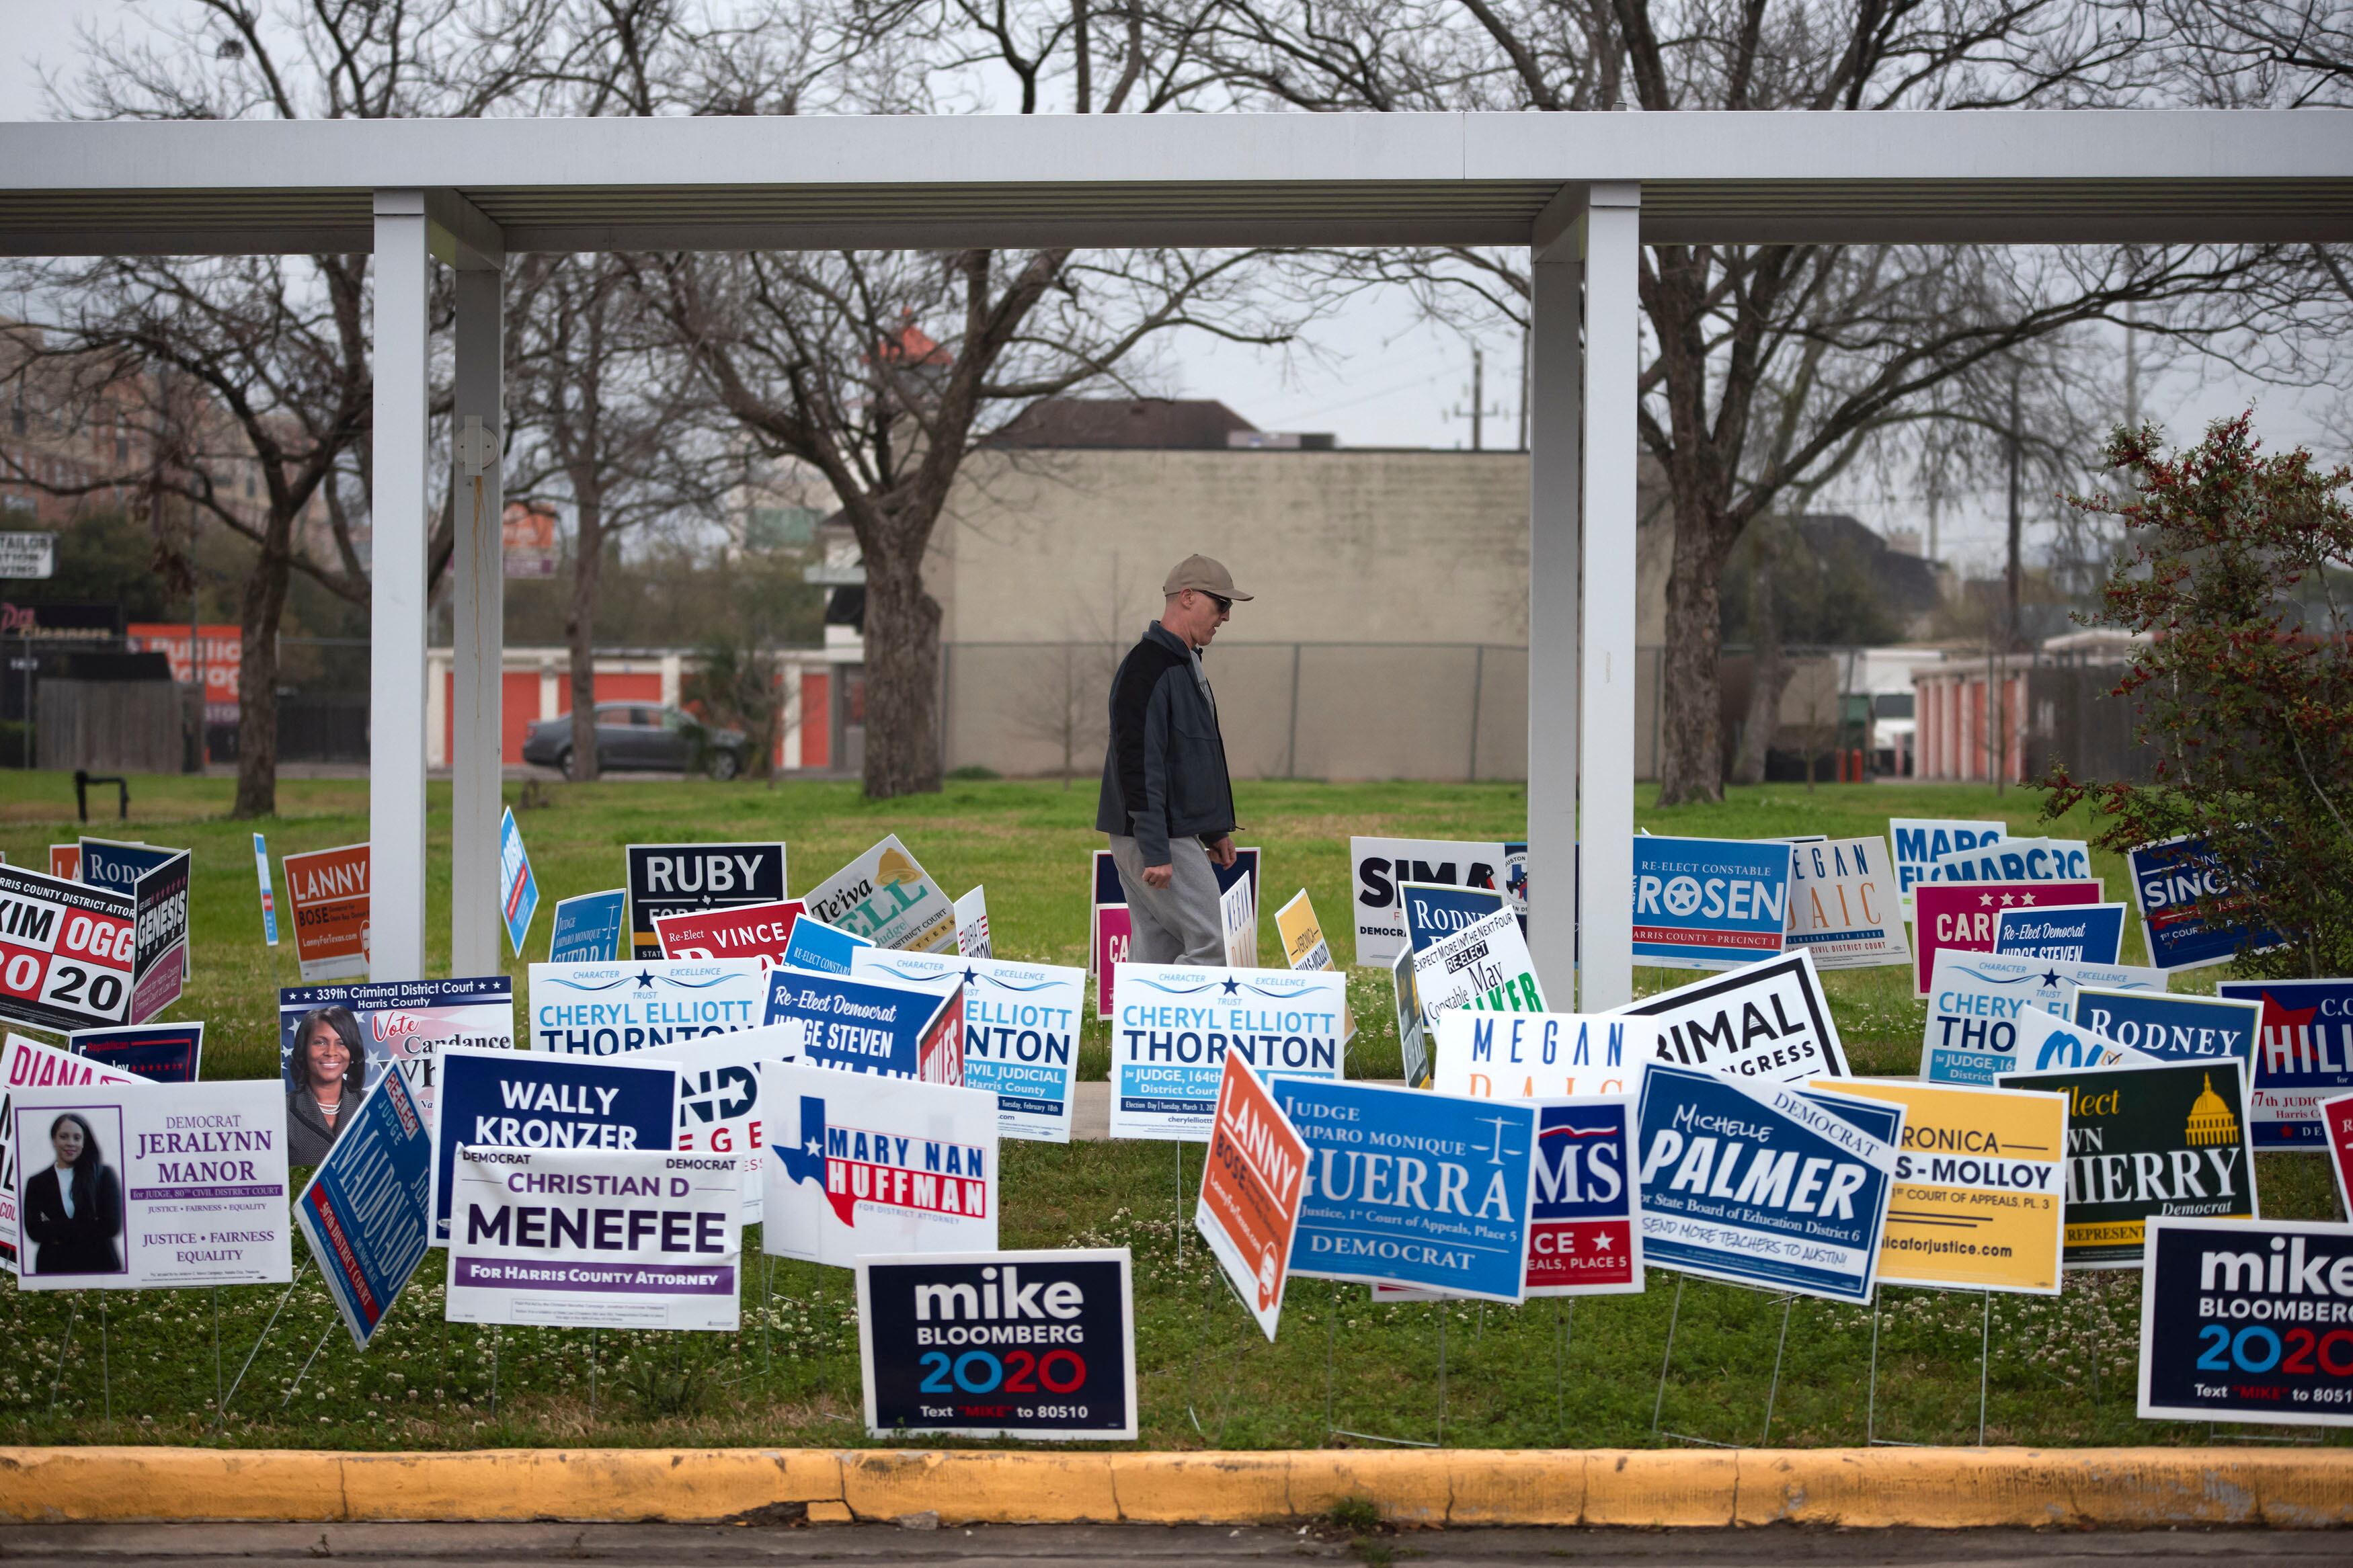 A person wearing a hat and a dark jacket walks behind a lawn full of candidate signs with a white structure over the top and a building in the background.